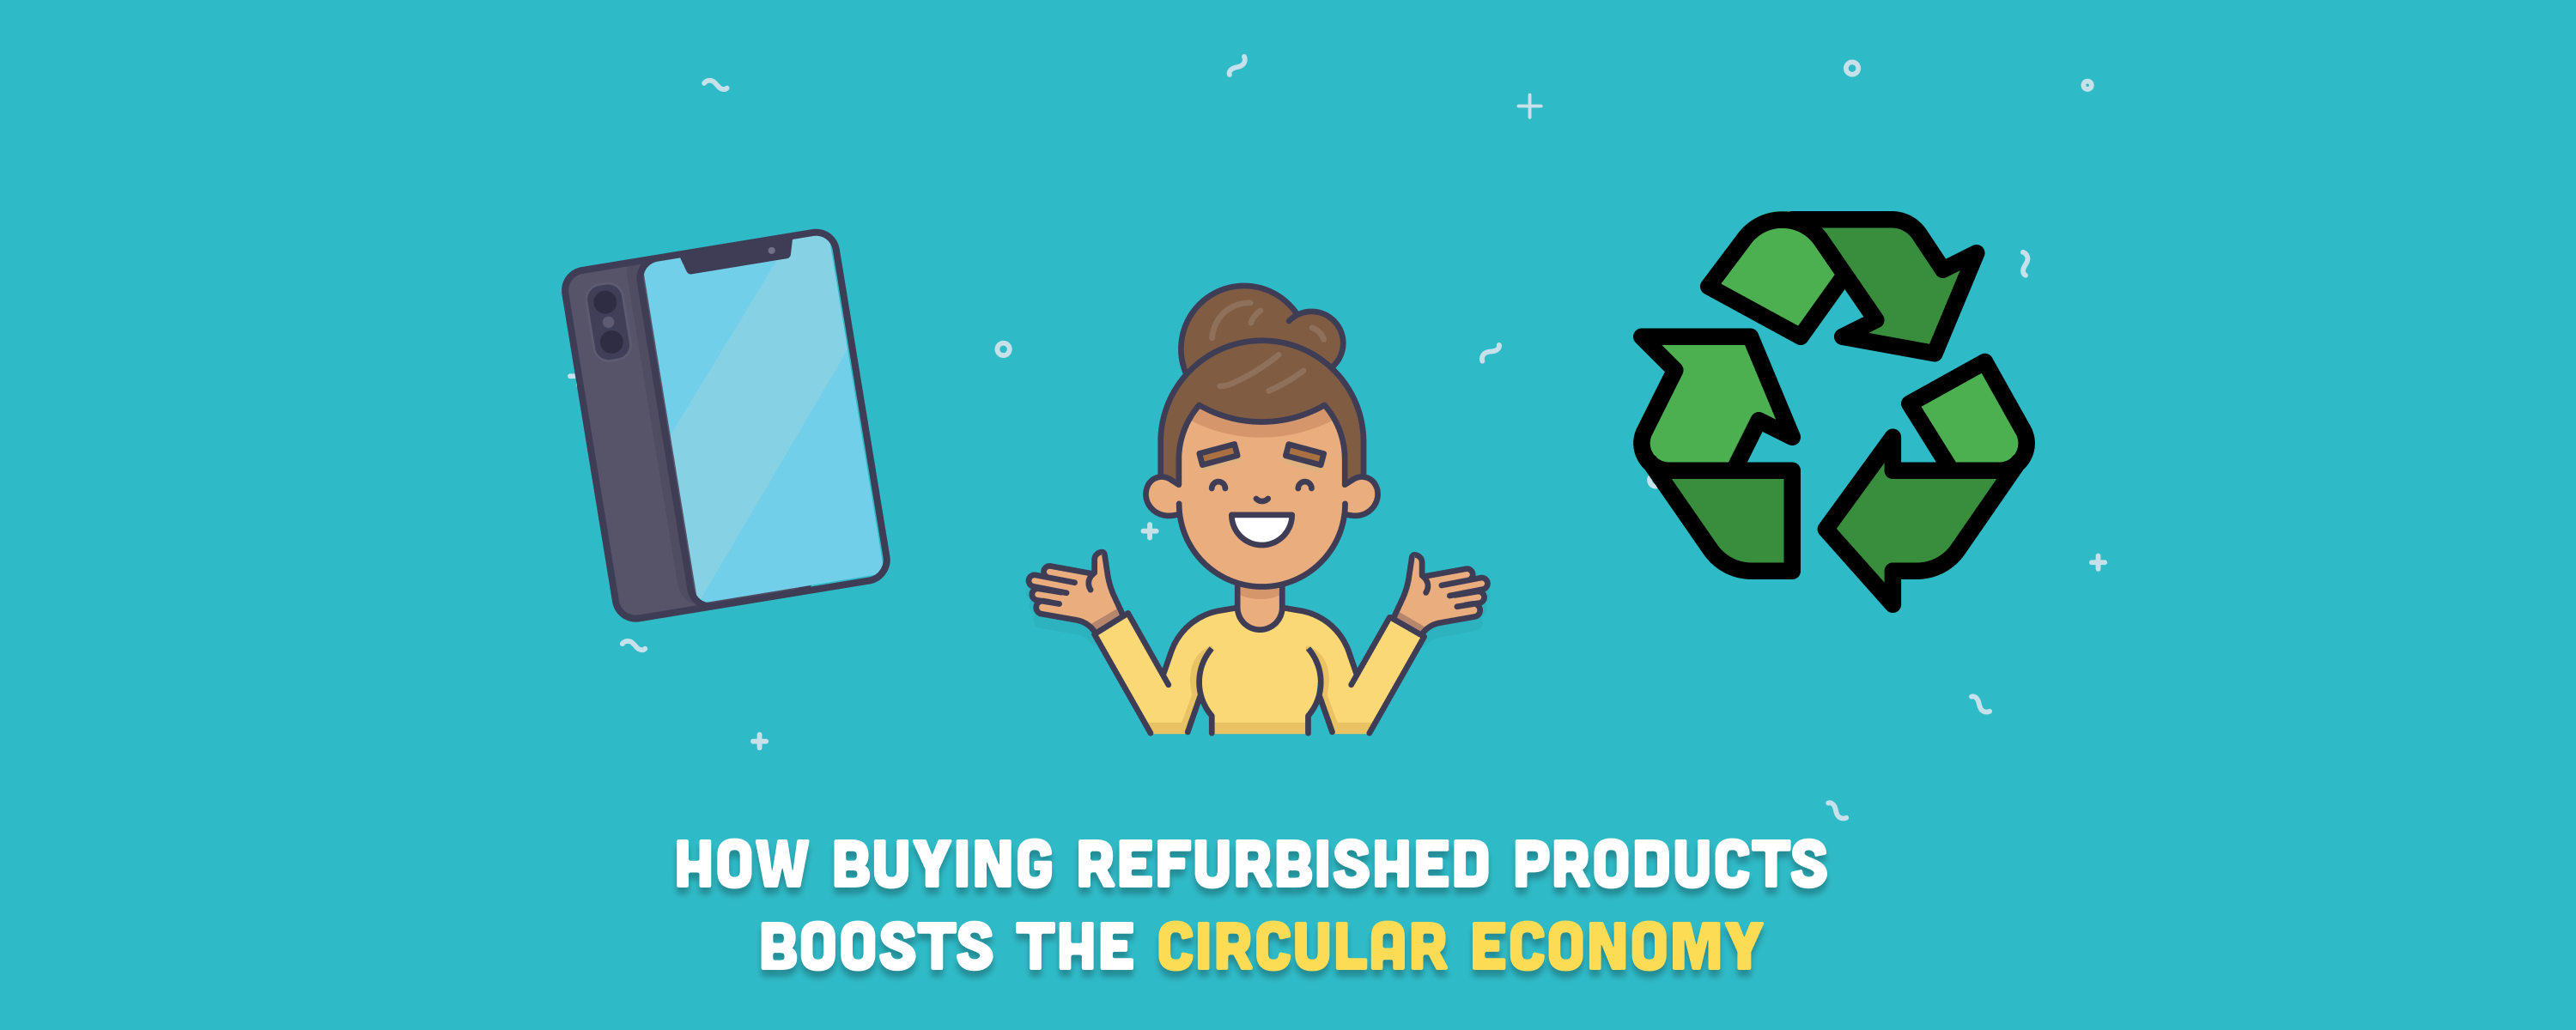 How Buying Refurbished Products Boosts the Circular Economy